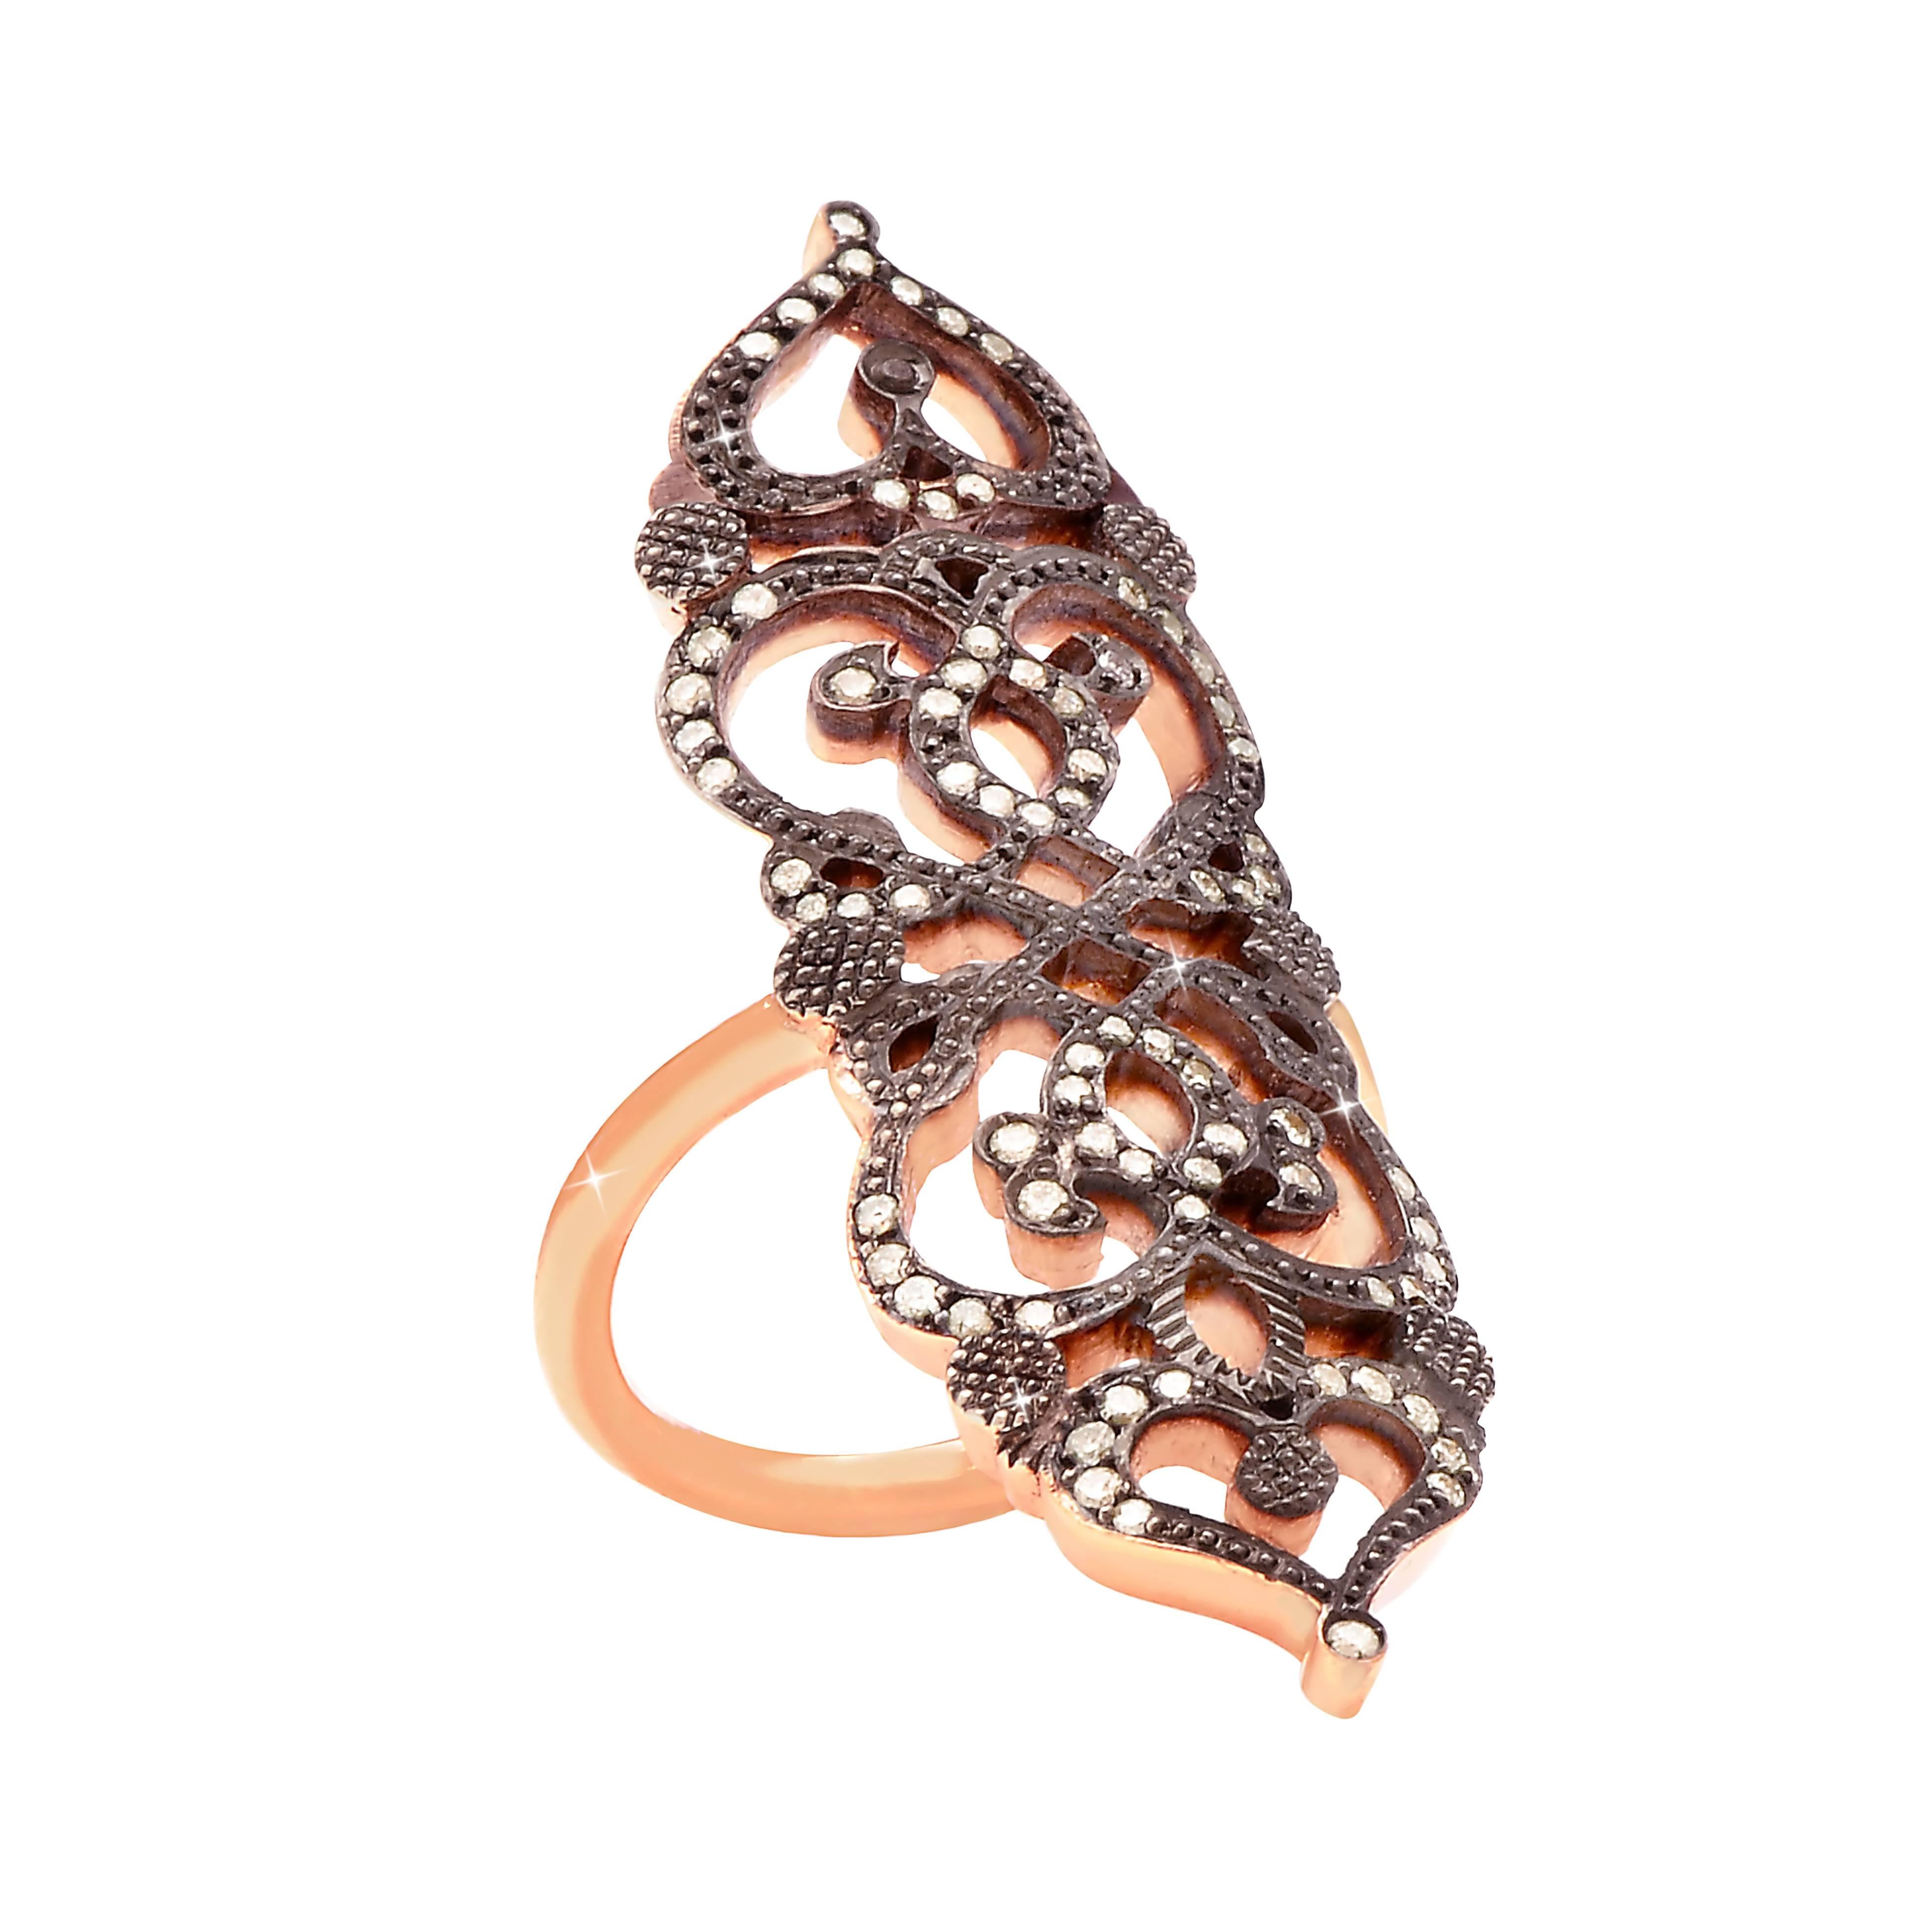 Sabine Getty ‘Medieval’ ring in 18k rose gold set with diamonds

Diamond: 0.35 

Available in sizes 52, 53, 54, 55.5,  

Relic was the debut collection by Sabine Getty launched in September 2012. The collection received much international buzz